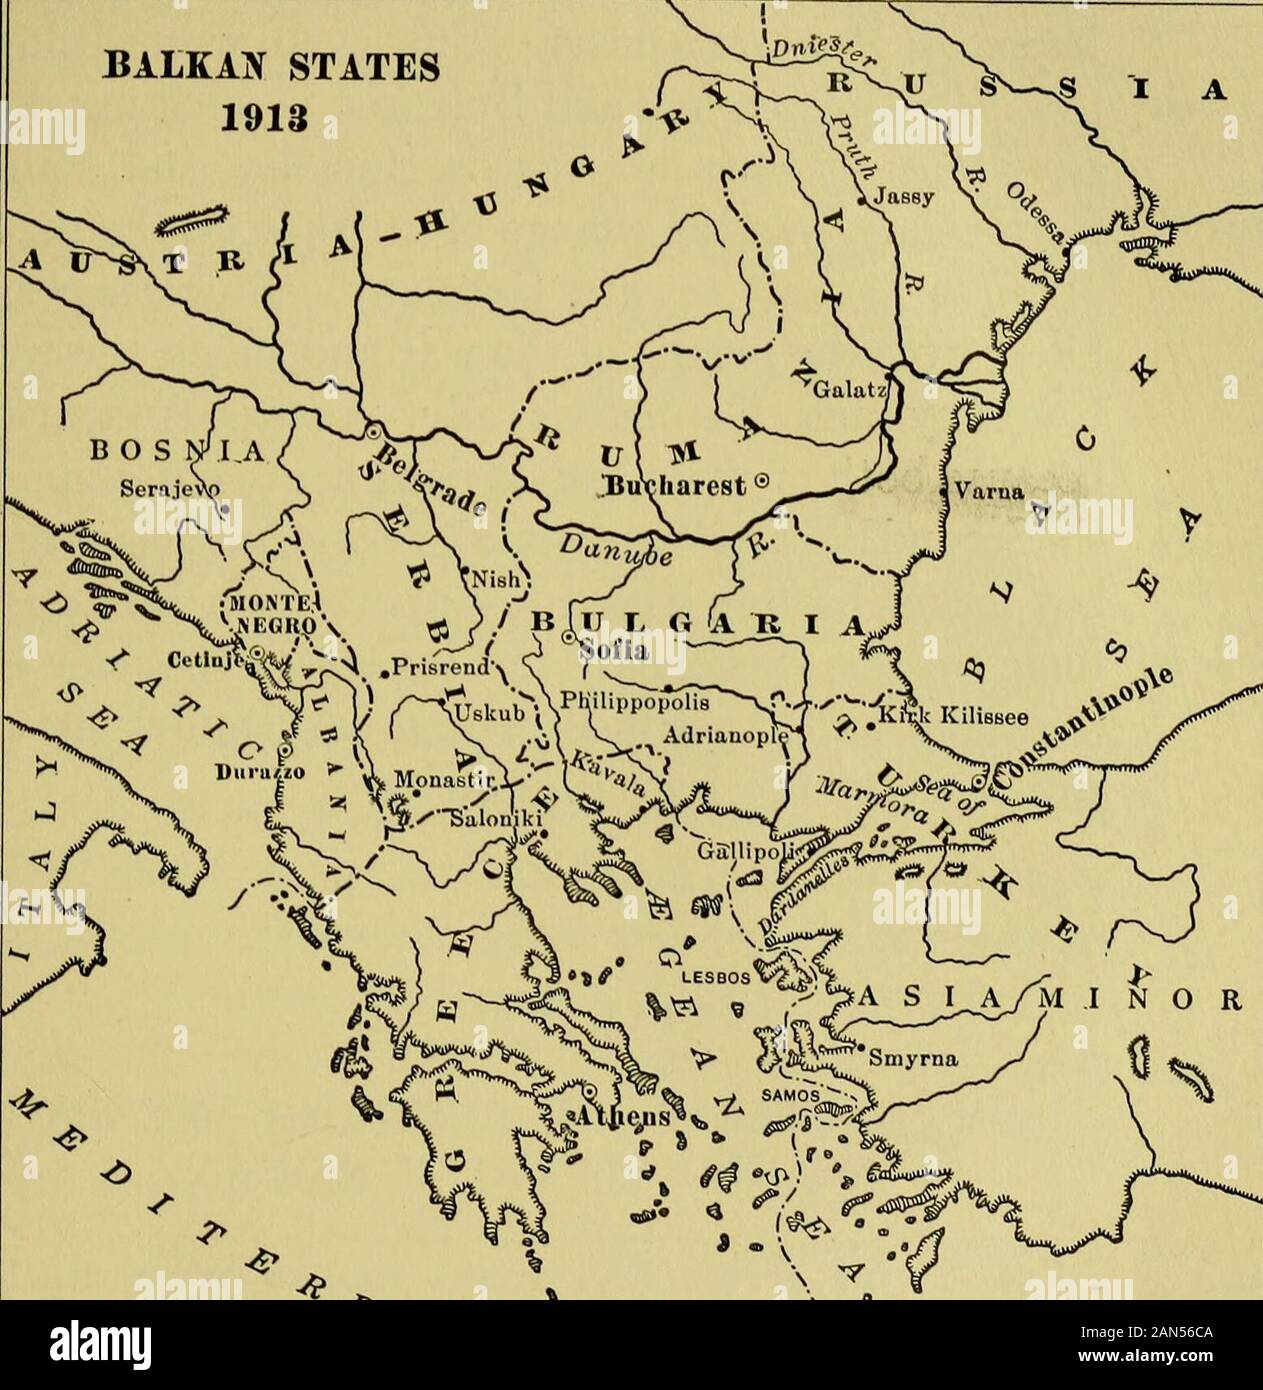 The causes and meaning of the great war . of her European territory,which  had been reduced from 65,300 square mileswith 6,130,000 people, to 10,880  square miles withabout 1,900,000 people. Rumania had forced